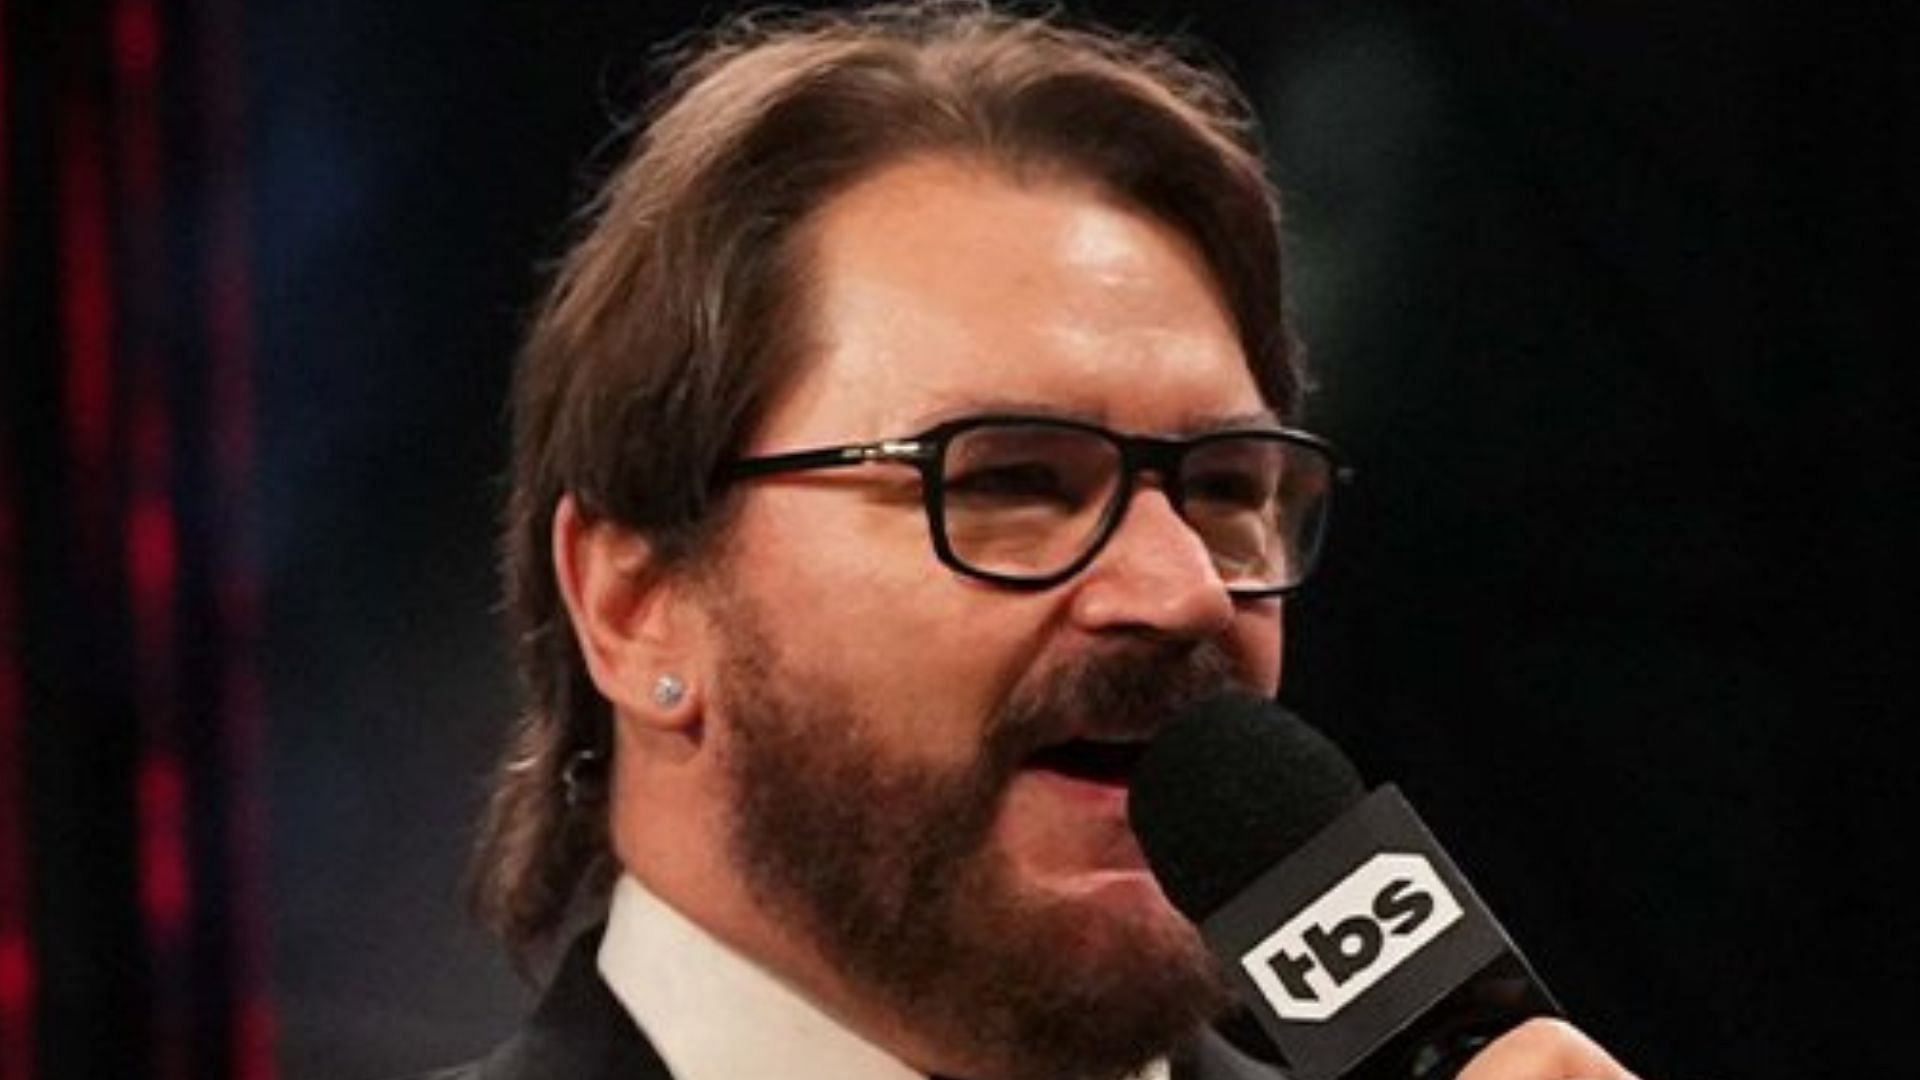 Tony Schiavone at a Dynamite event in 2022